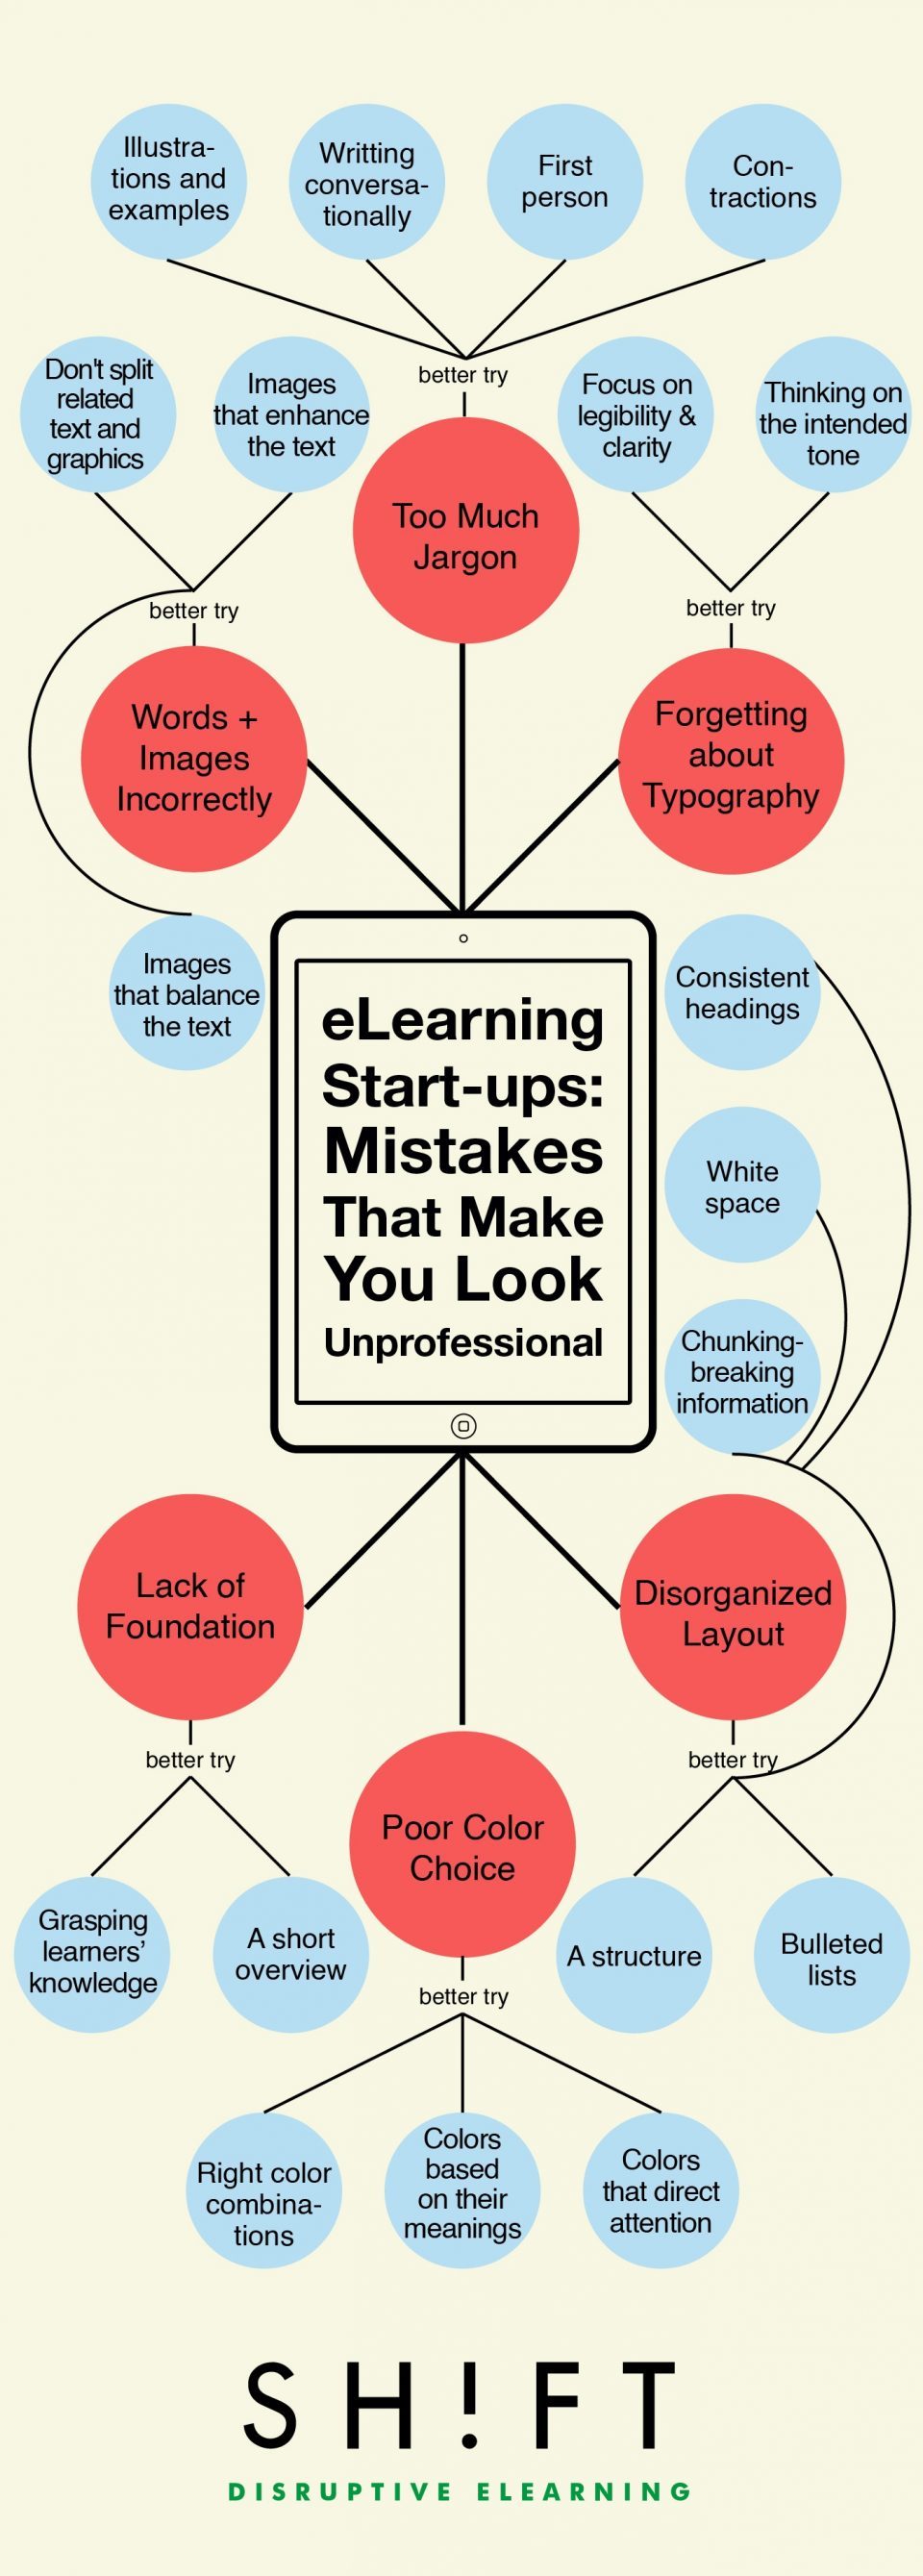 6 eLearning Start-ups Mistakes That Make You Look Unprofessional